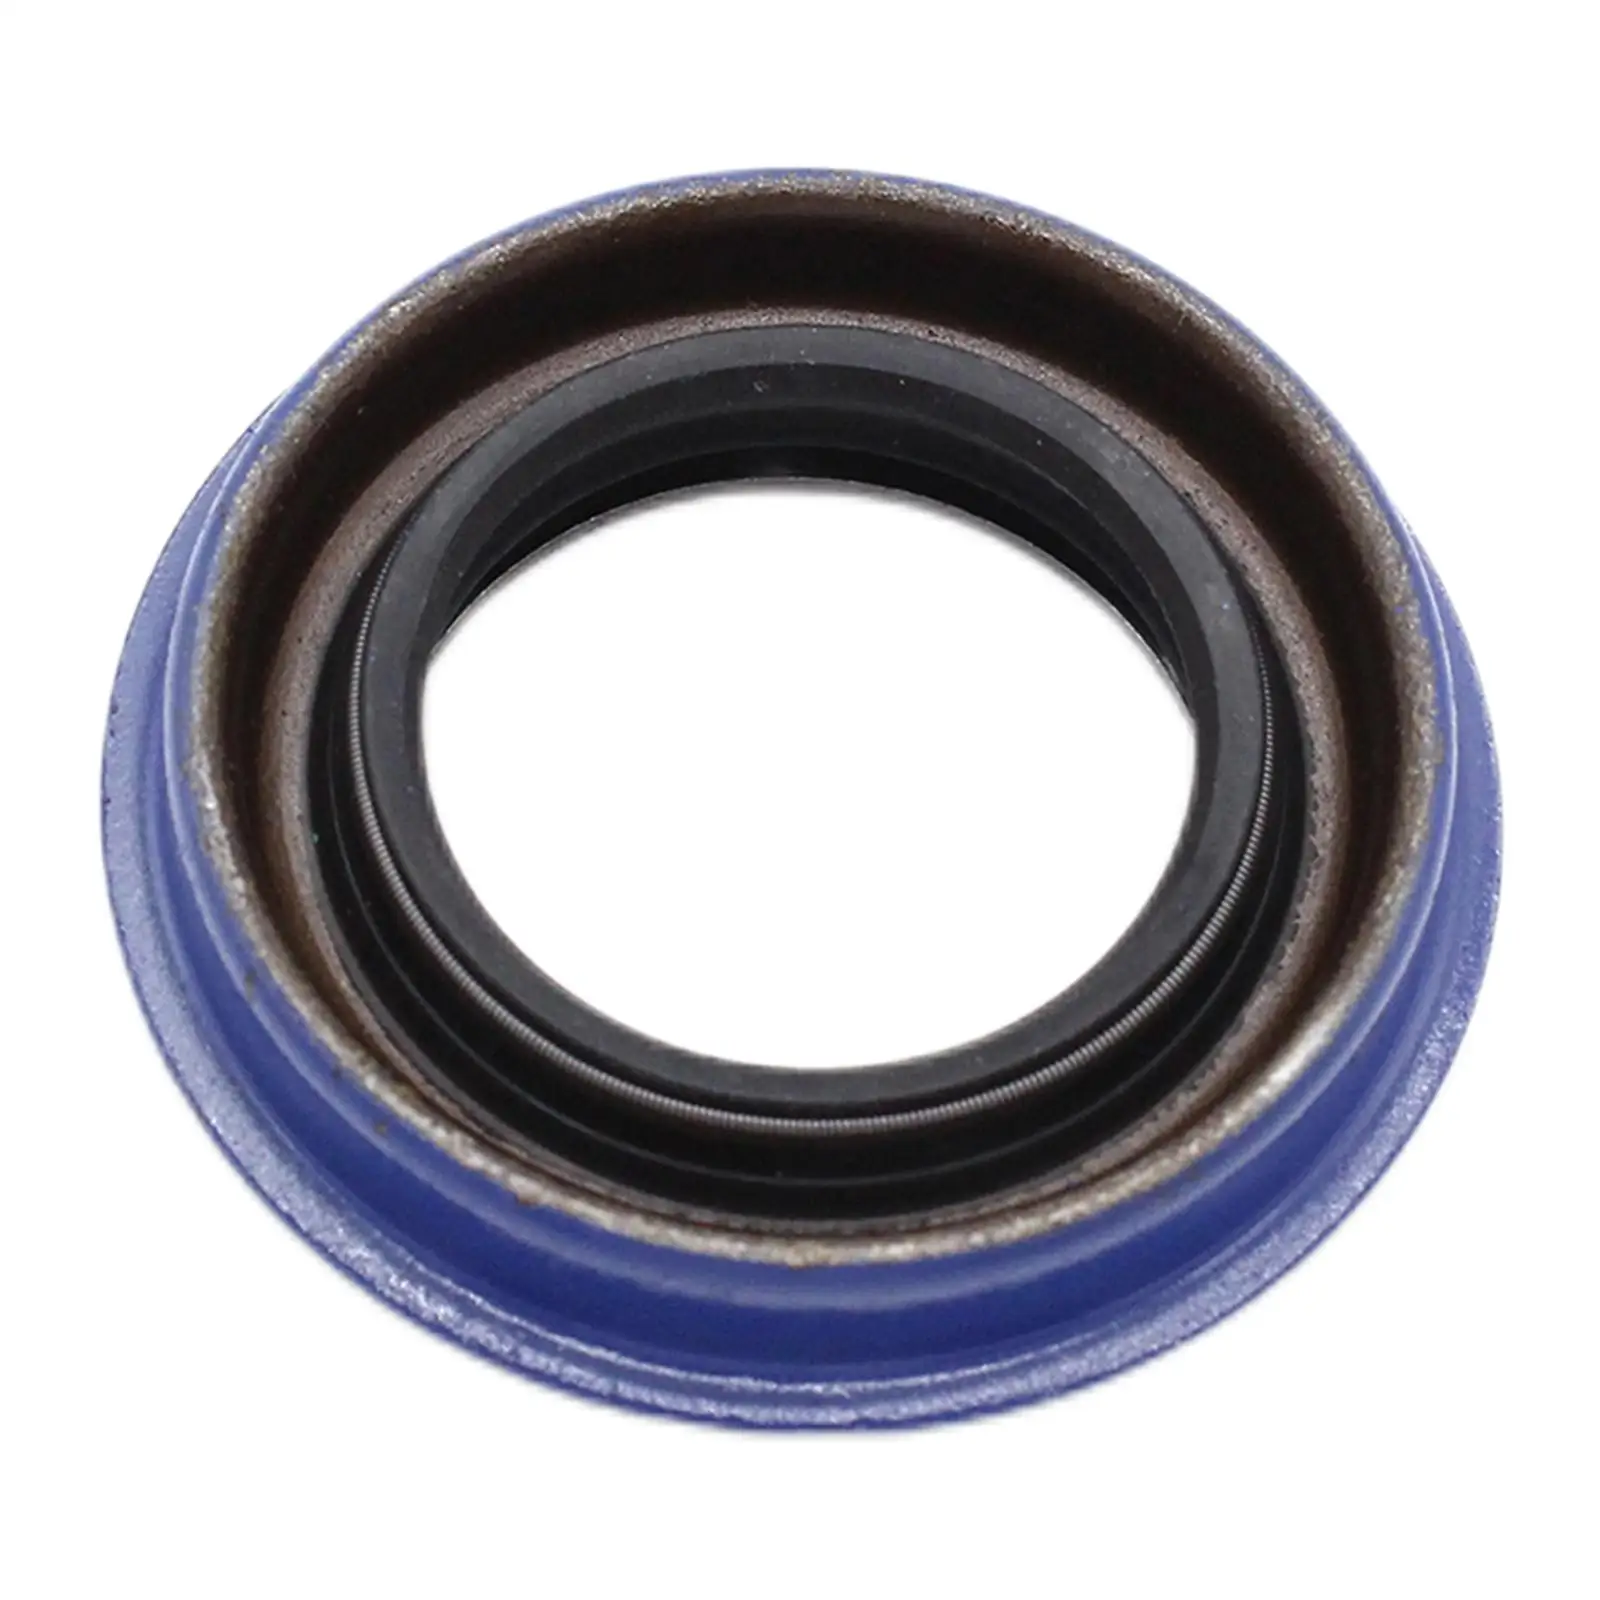 Driveshaft Oil Seal 12755013 Accessories Engine Axle Shaft Seal Fit for Vauxhall for Opel Zafira Mokka x Signum F25